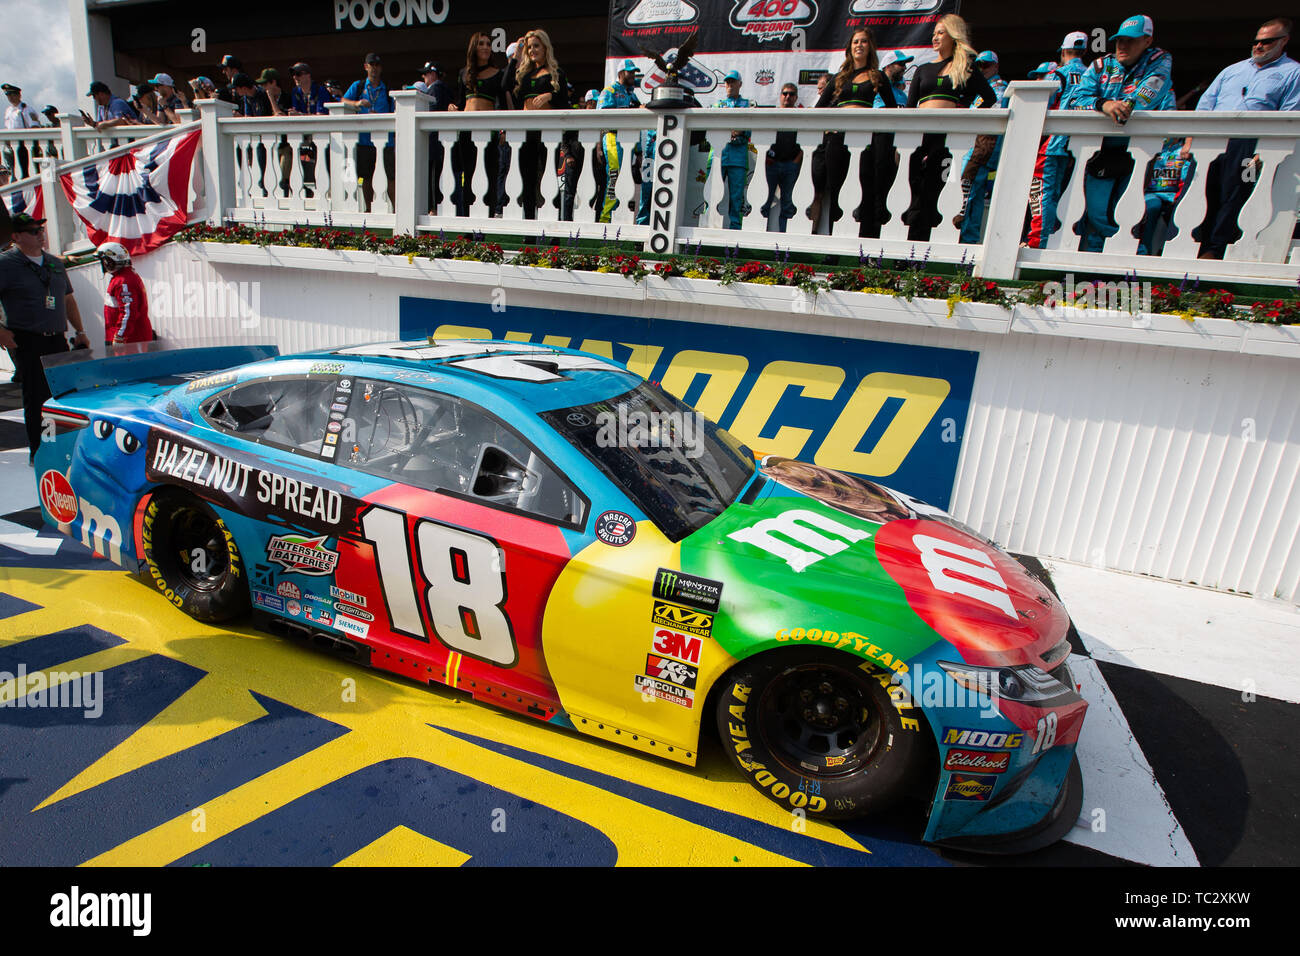 June 02, 2019: Monster Energy NASCAR Cup Series Kyle Busch's car (18) sits  at Victory Lane after the Pocono 400 at Pocono Raceway in Long Pond, PA  Daniel Lea/CSM Stock Photo - Alamy